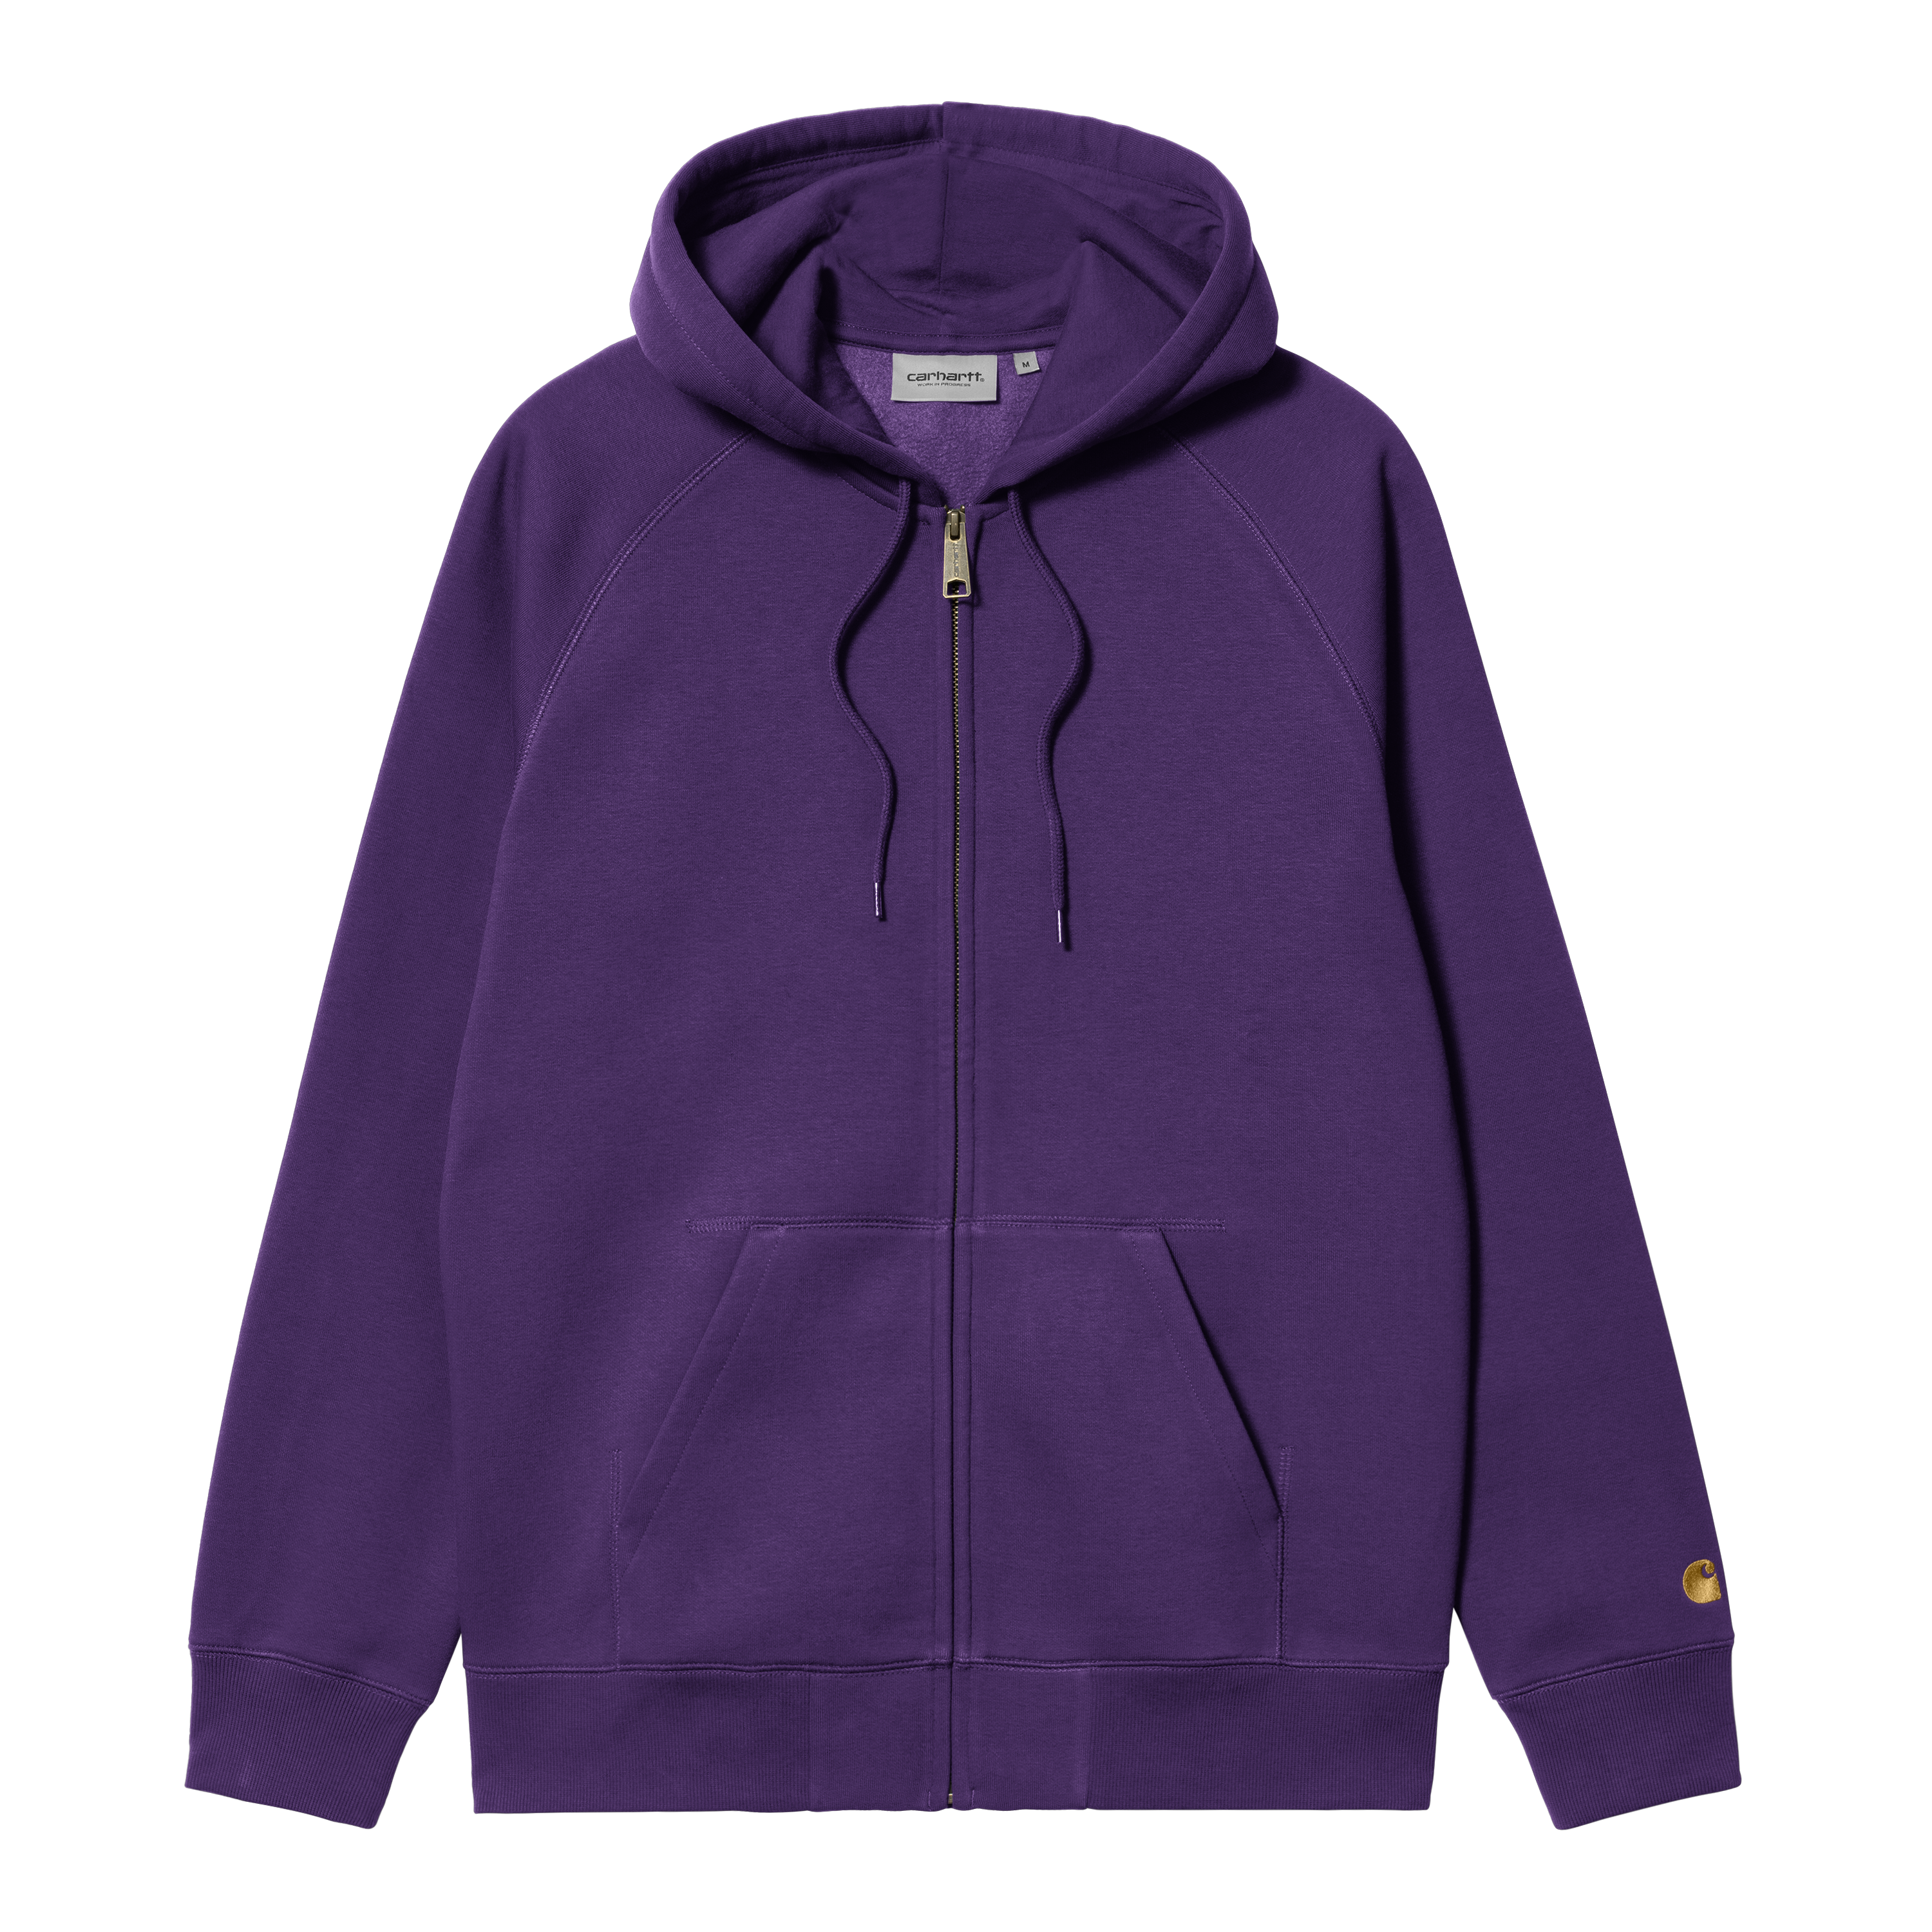 Carhartt WIP Hooded Chase Jacket in Lila